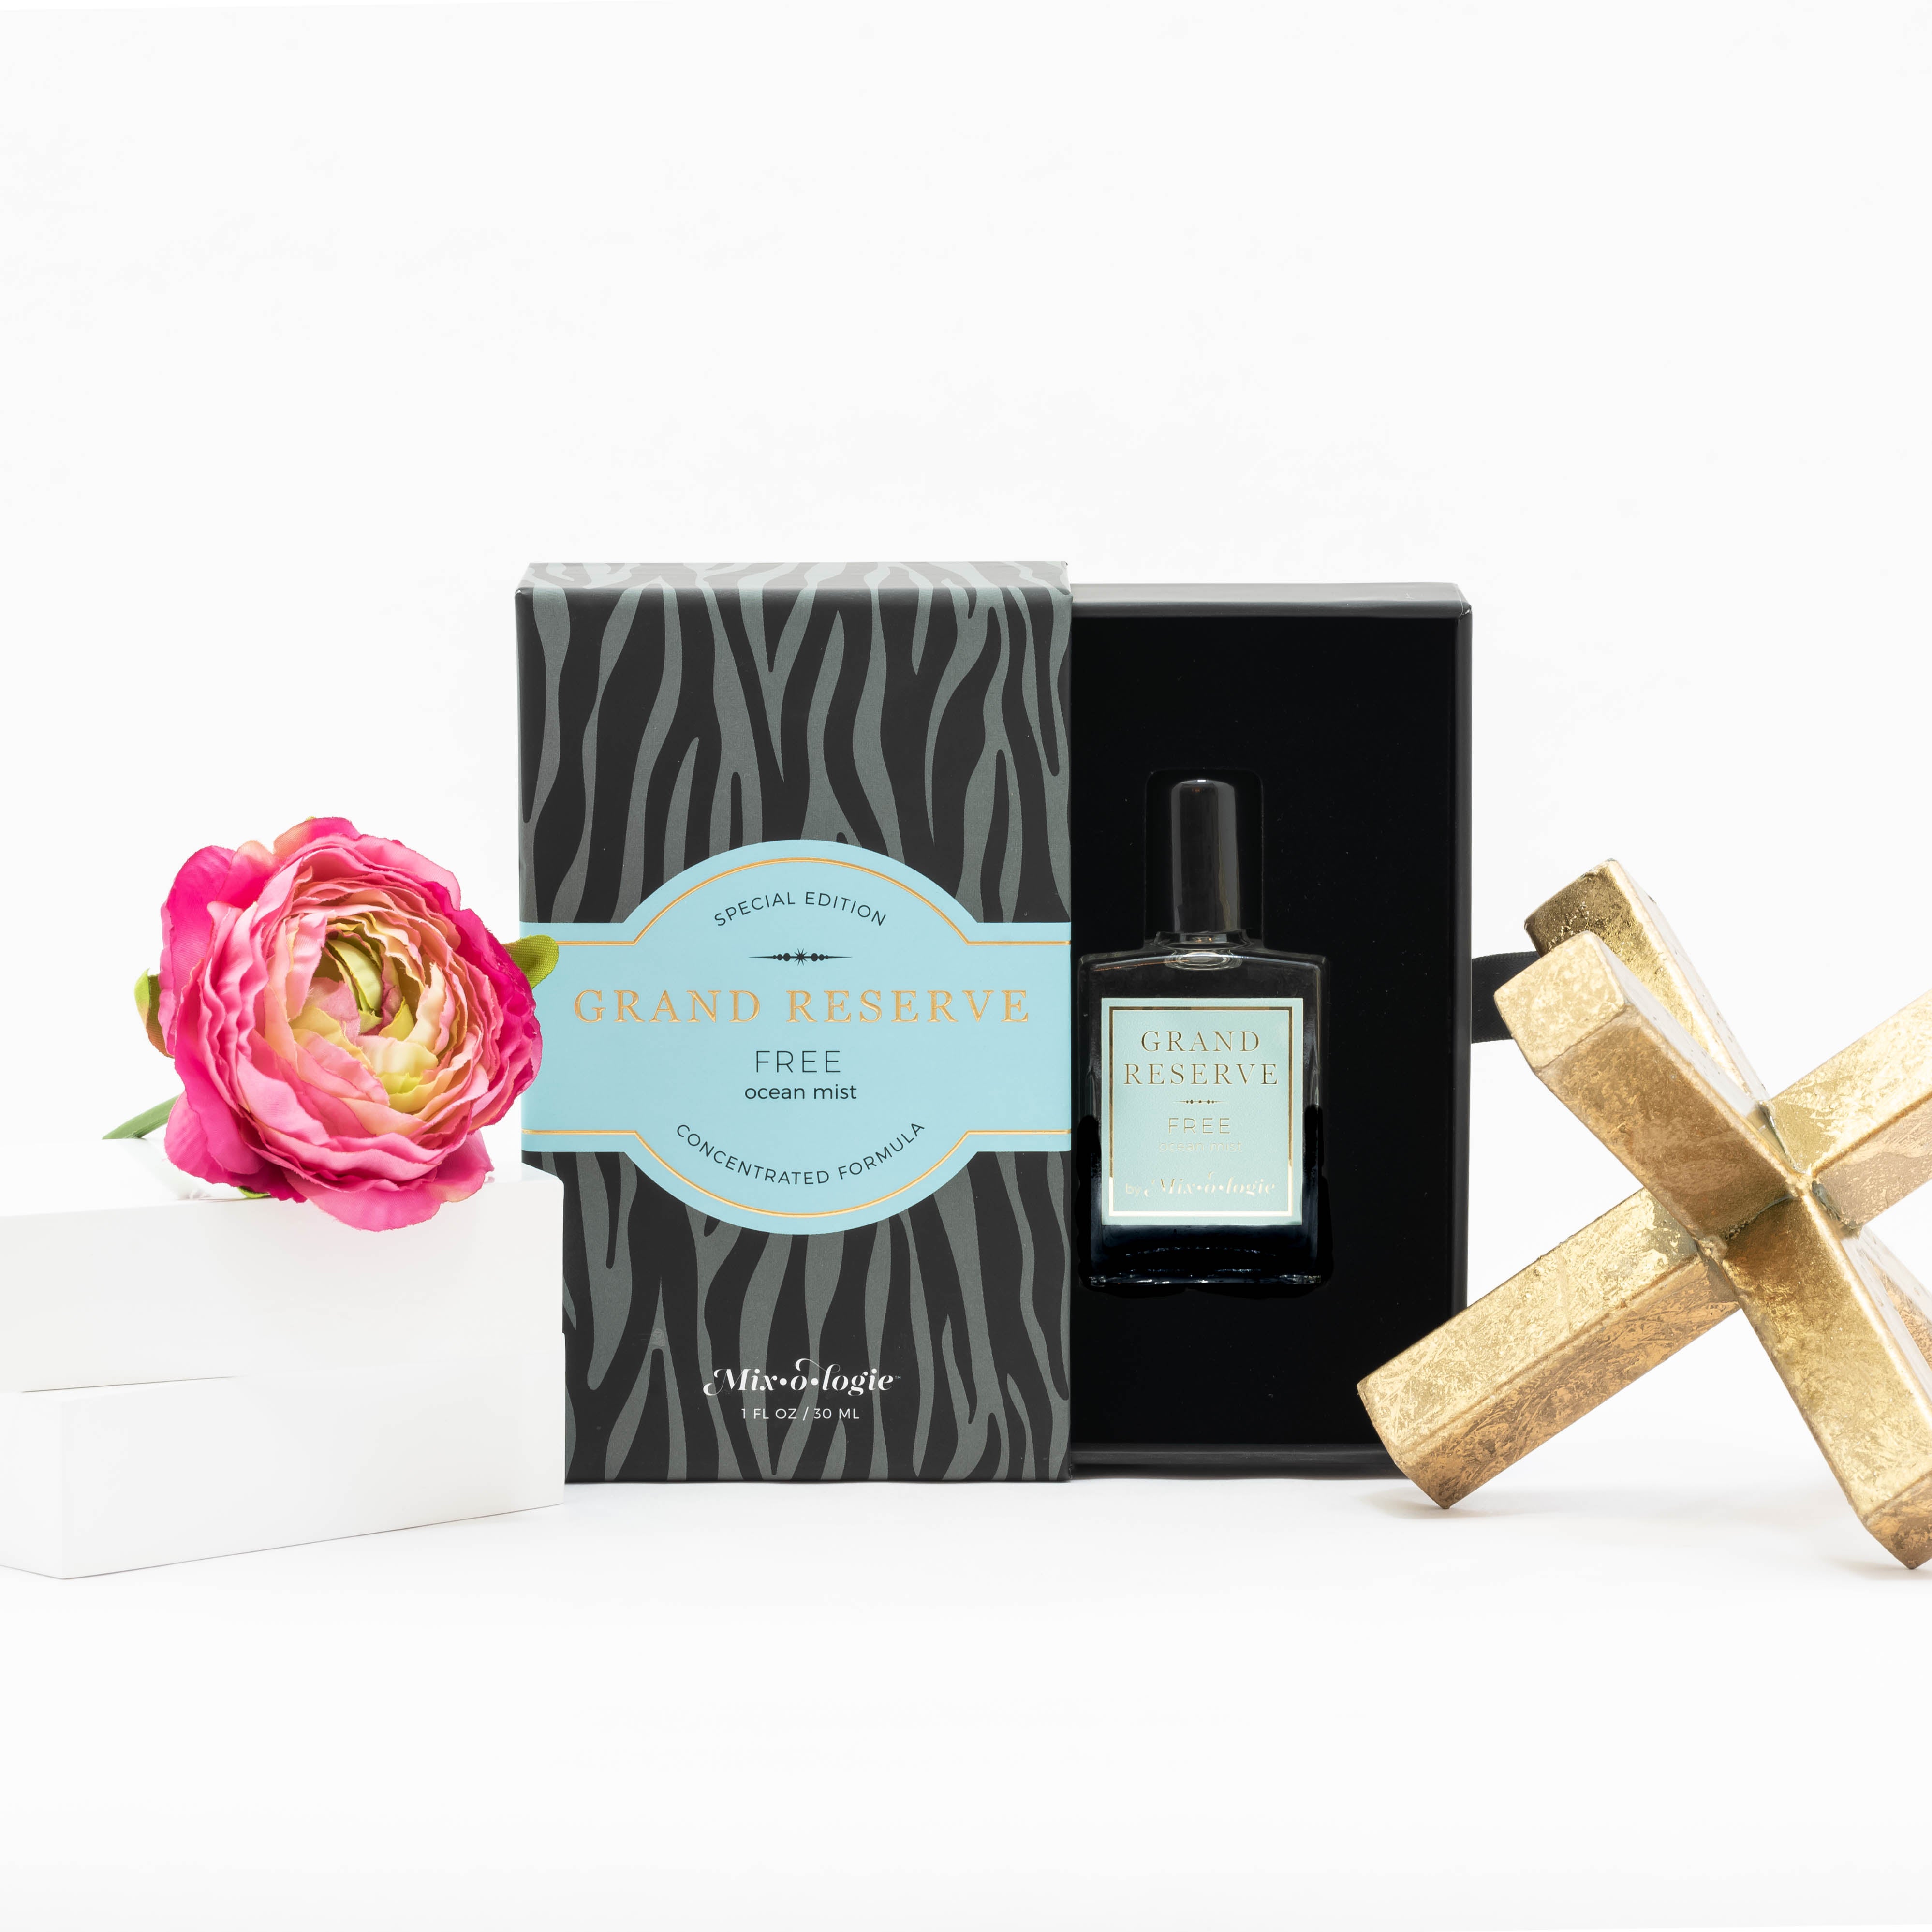 Free (Ocean Mist) Special Edition Grand Reserve concentrated formula in clear glass rectangle perfume bottle that has 1 fl oz or 30 mL of clear liquid with black cap, label, and spray nozzle. Black zebra pattern rectangle box with pale blue letting. Grand Reserve and box pictured with white background pink flower and gold table décor.